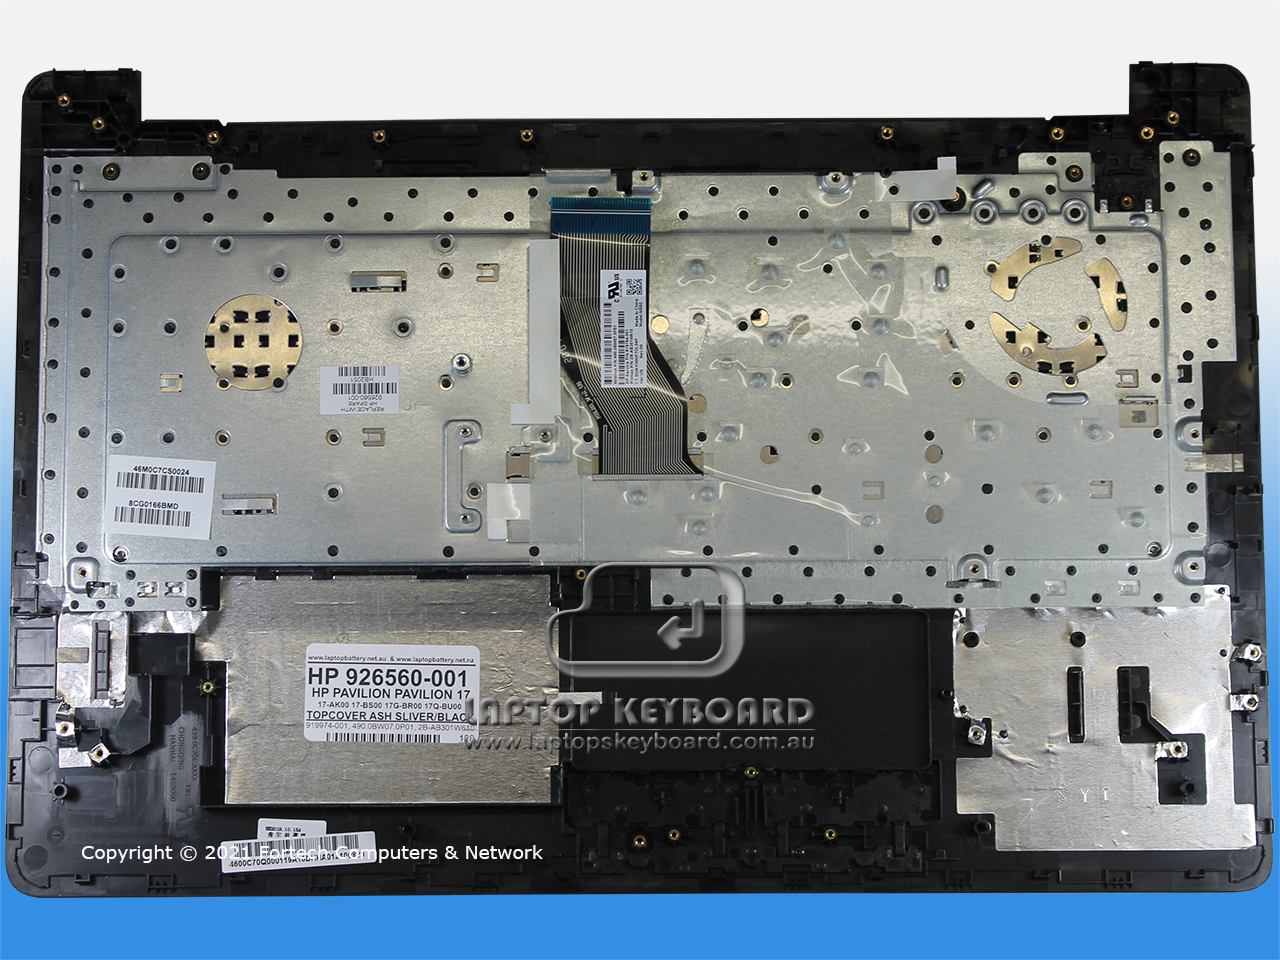 HP PAVILION 17-AK000 17-BS000 TOPCOVER WITH KEYBOARD 926560-001 - Click Image to Close